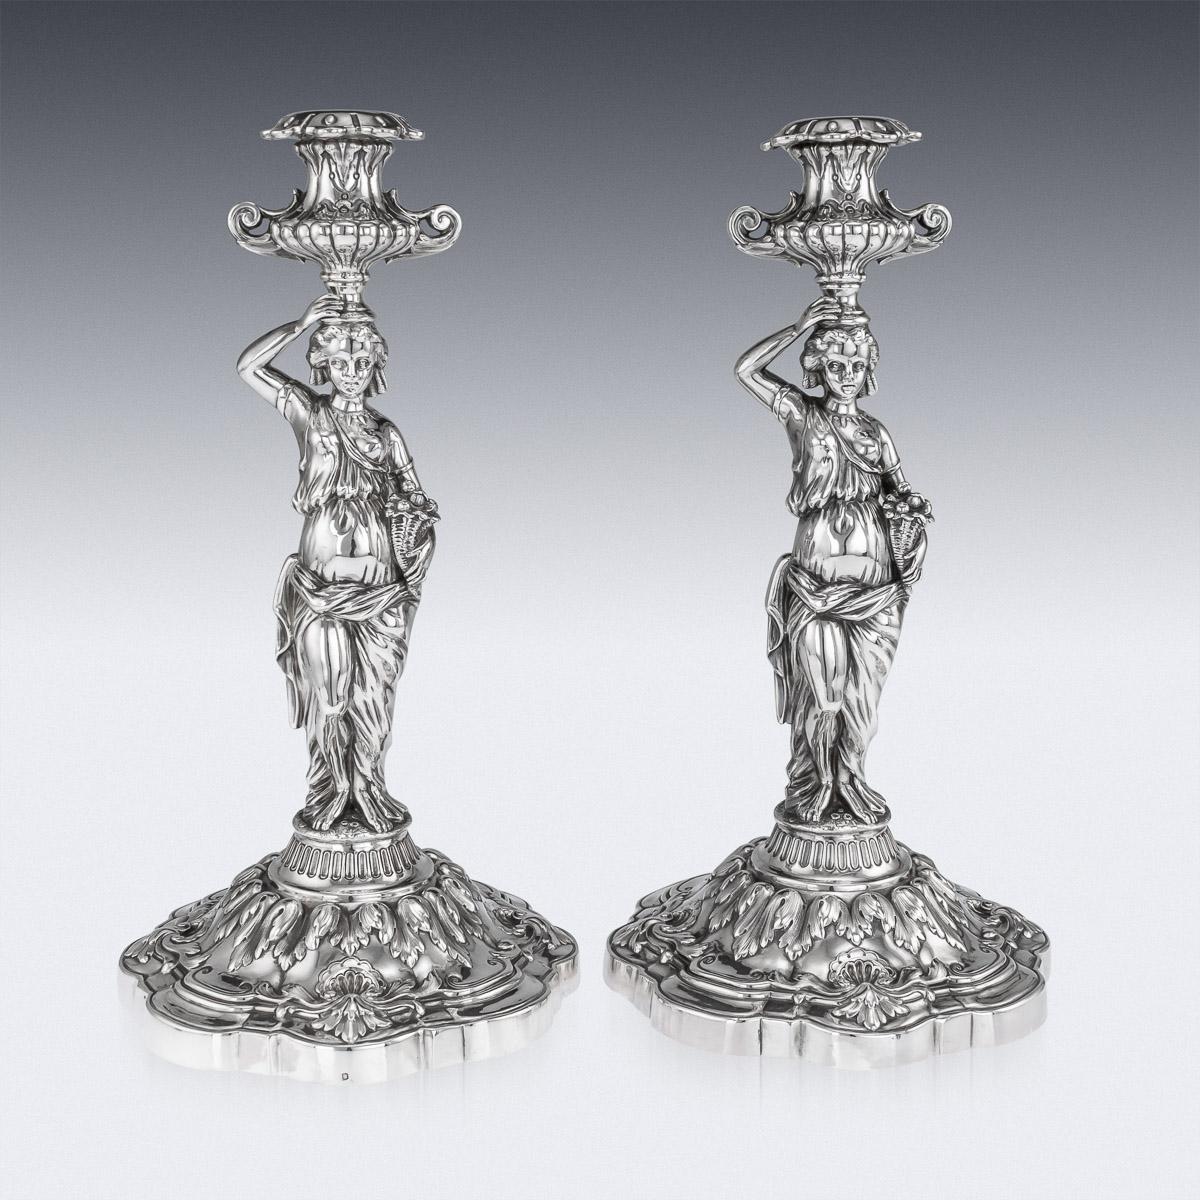 Antique 19th century French solid silver candlesticks, exceptionally large and heavy gauge, each on shaped-quatrefoil base and embellished with shells and leaves, the cast supporting figures depicting the Goddess Demeter, the Olympian goddess of the